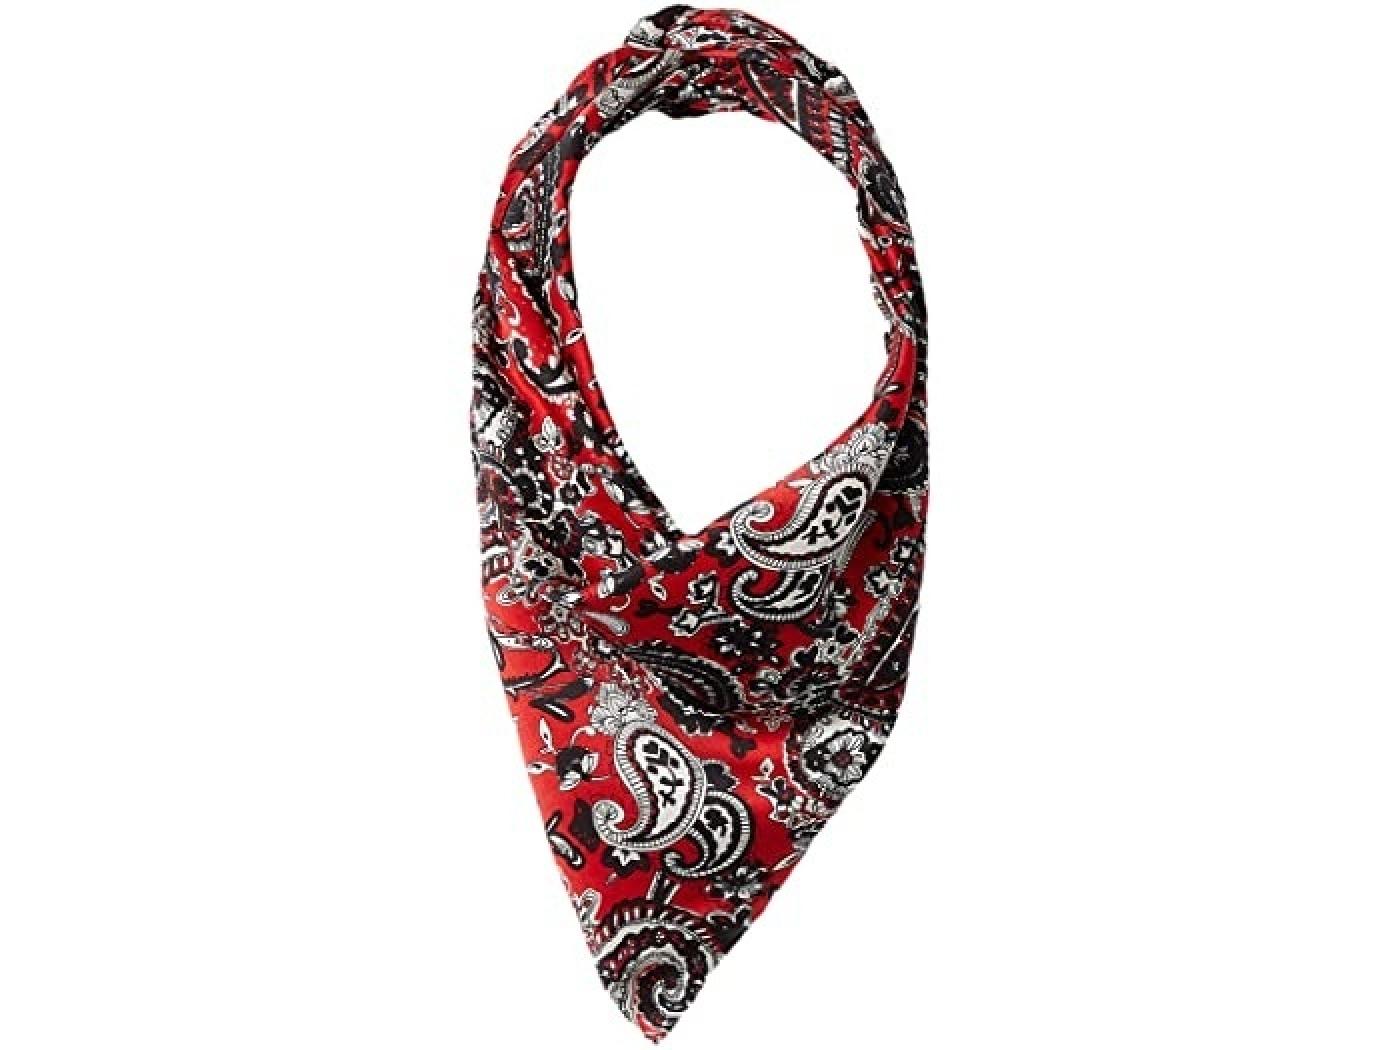 M&F Western Products Paisley Wild Rags Red